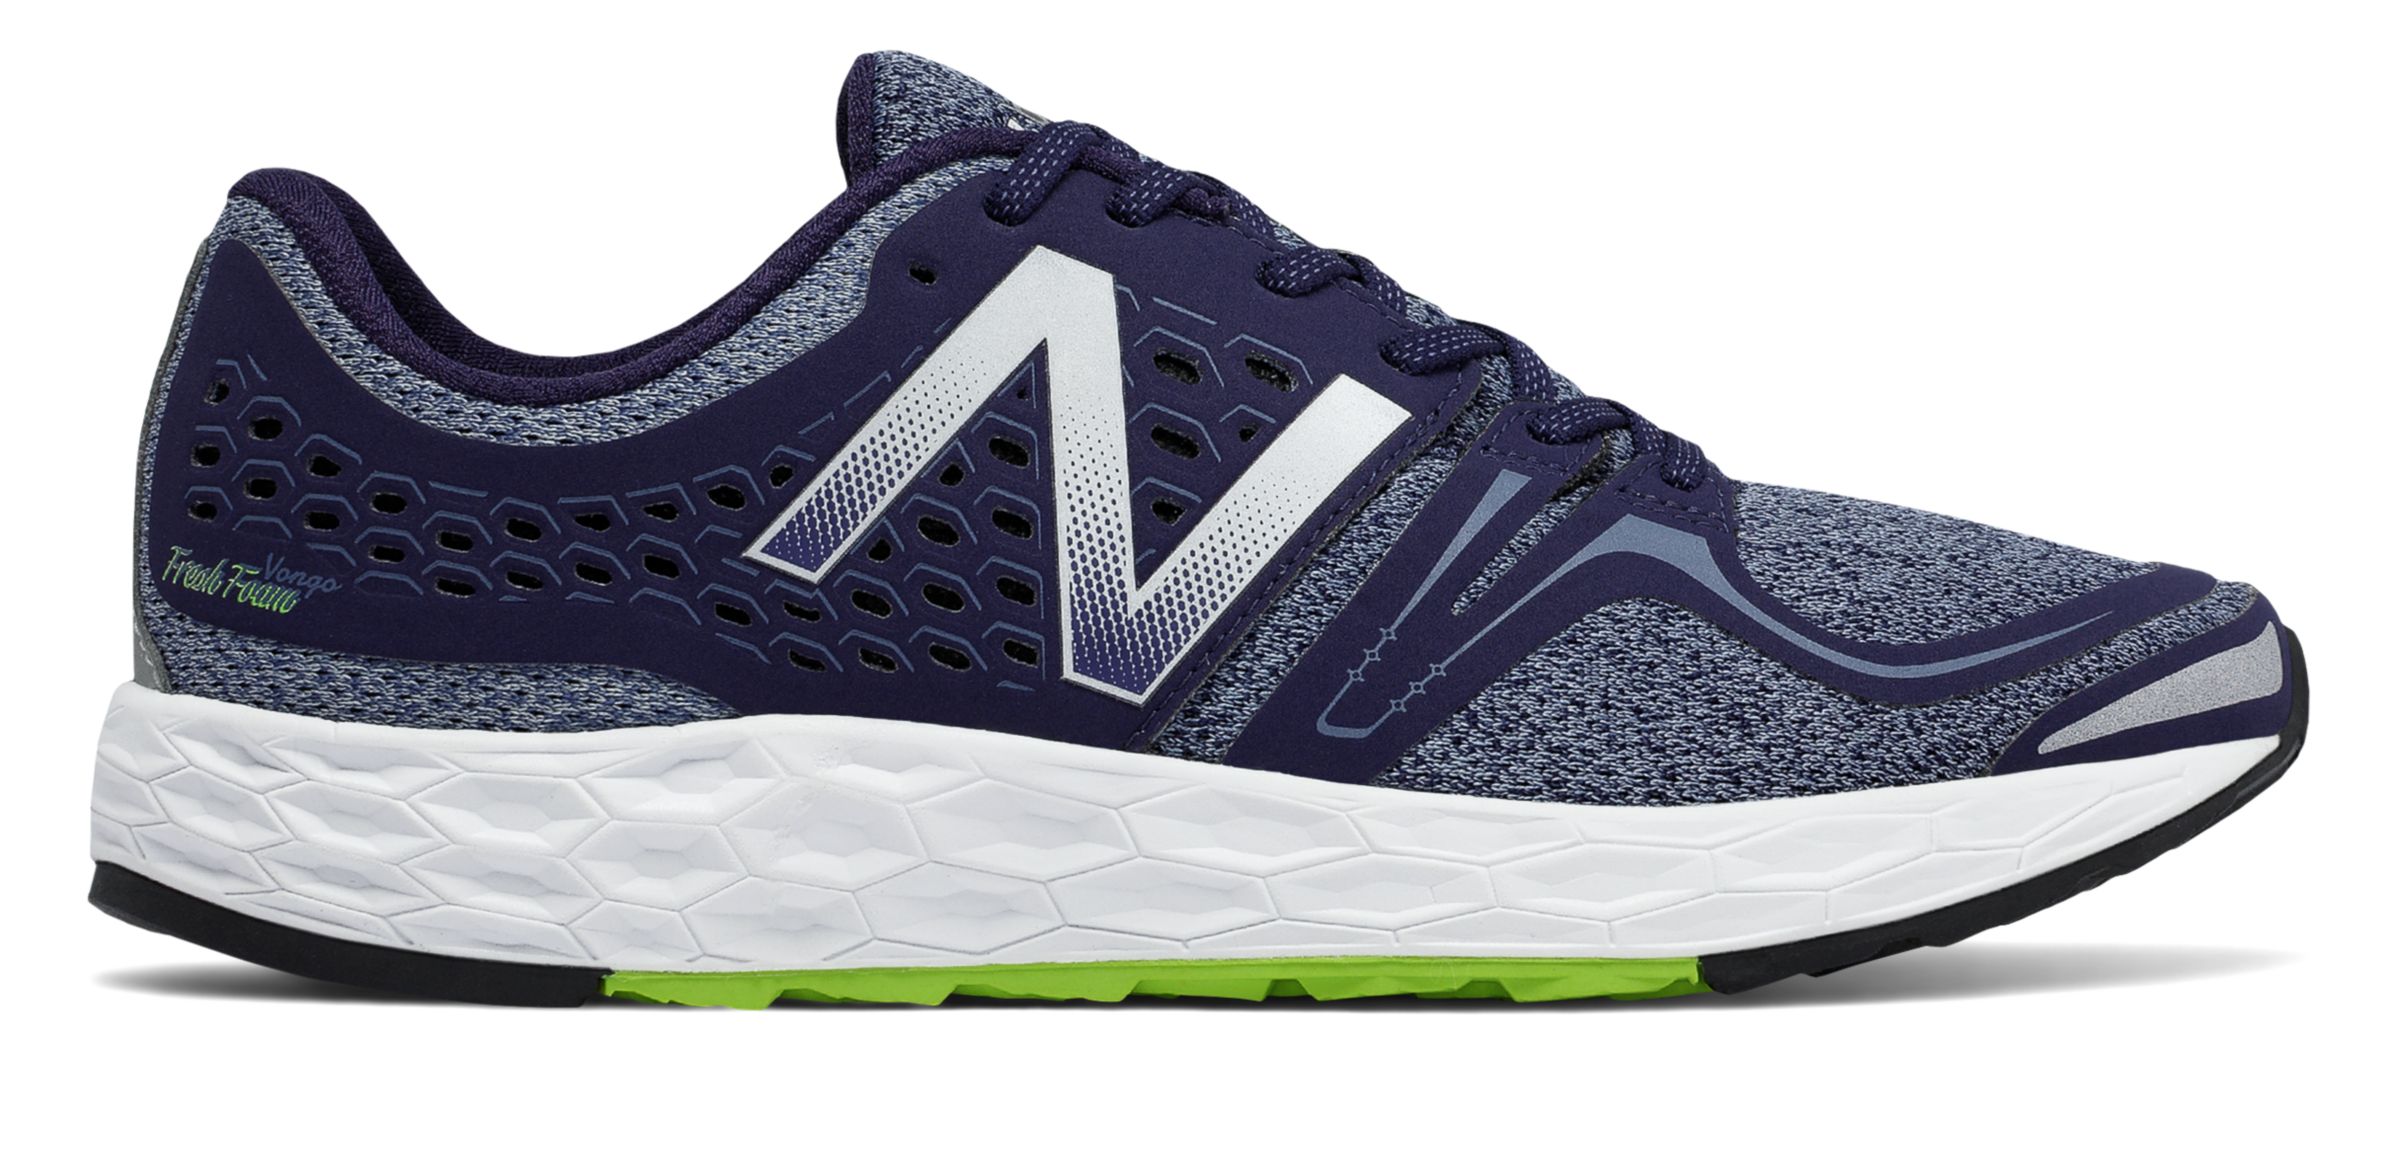 New Balance MVNGO on Sale - Discounts Up to 60% Off on MVNGOBH at Joe's New  Balance Outlet